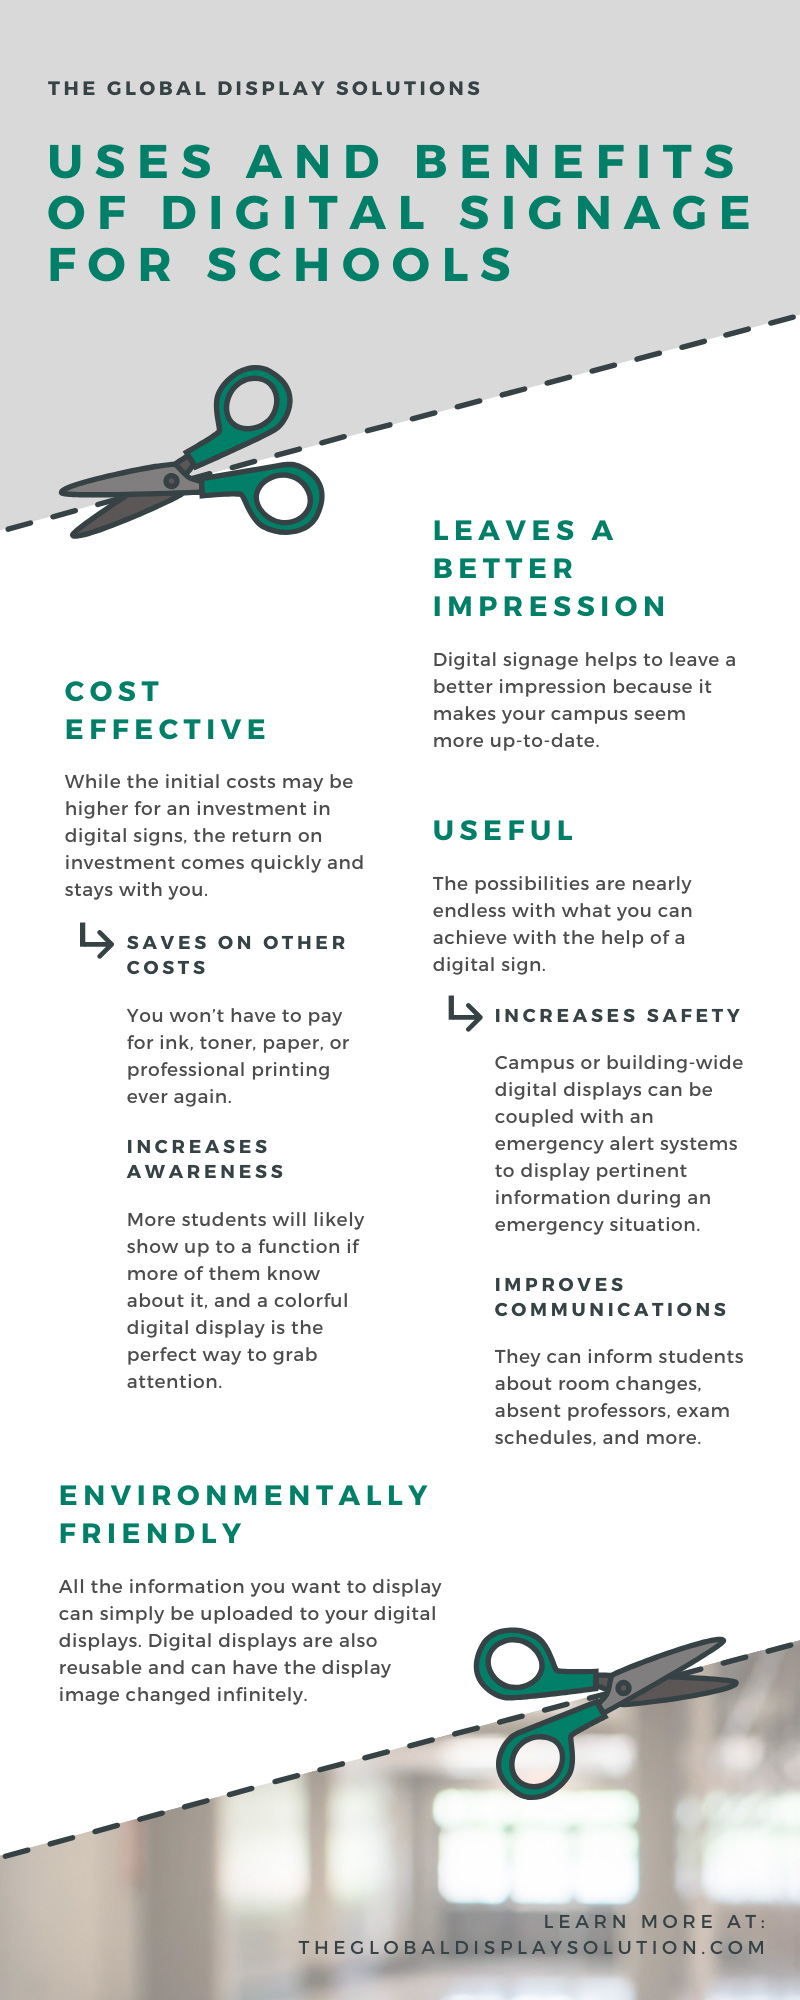 Uses and Benefits of Digital Signage for Schools infographic